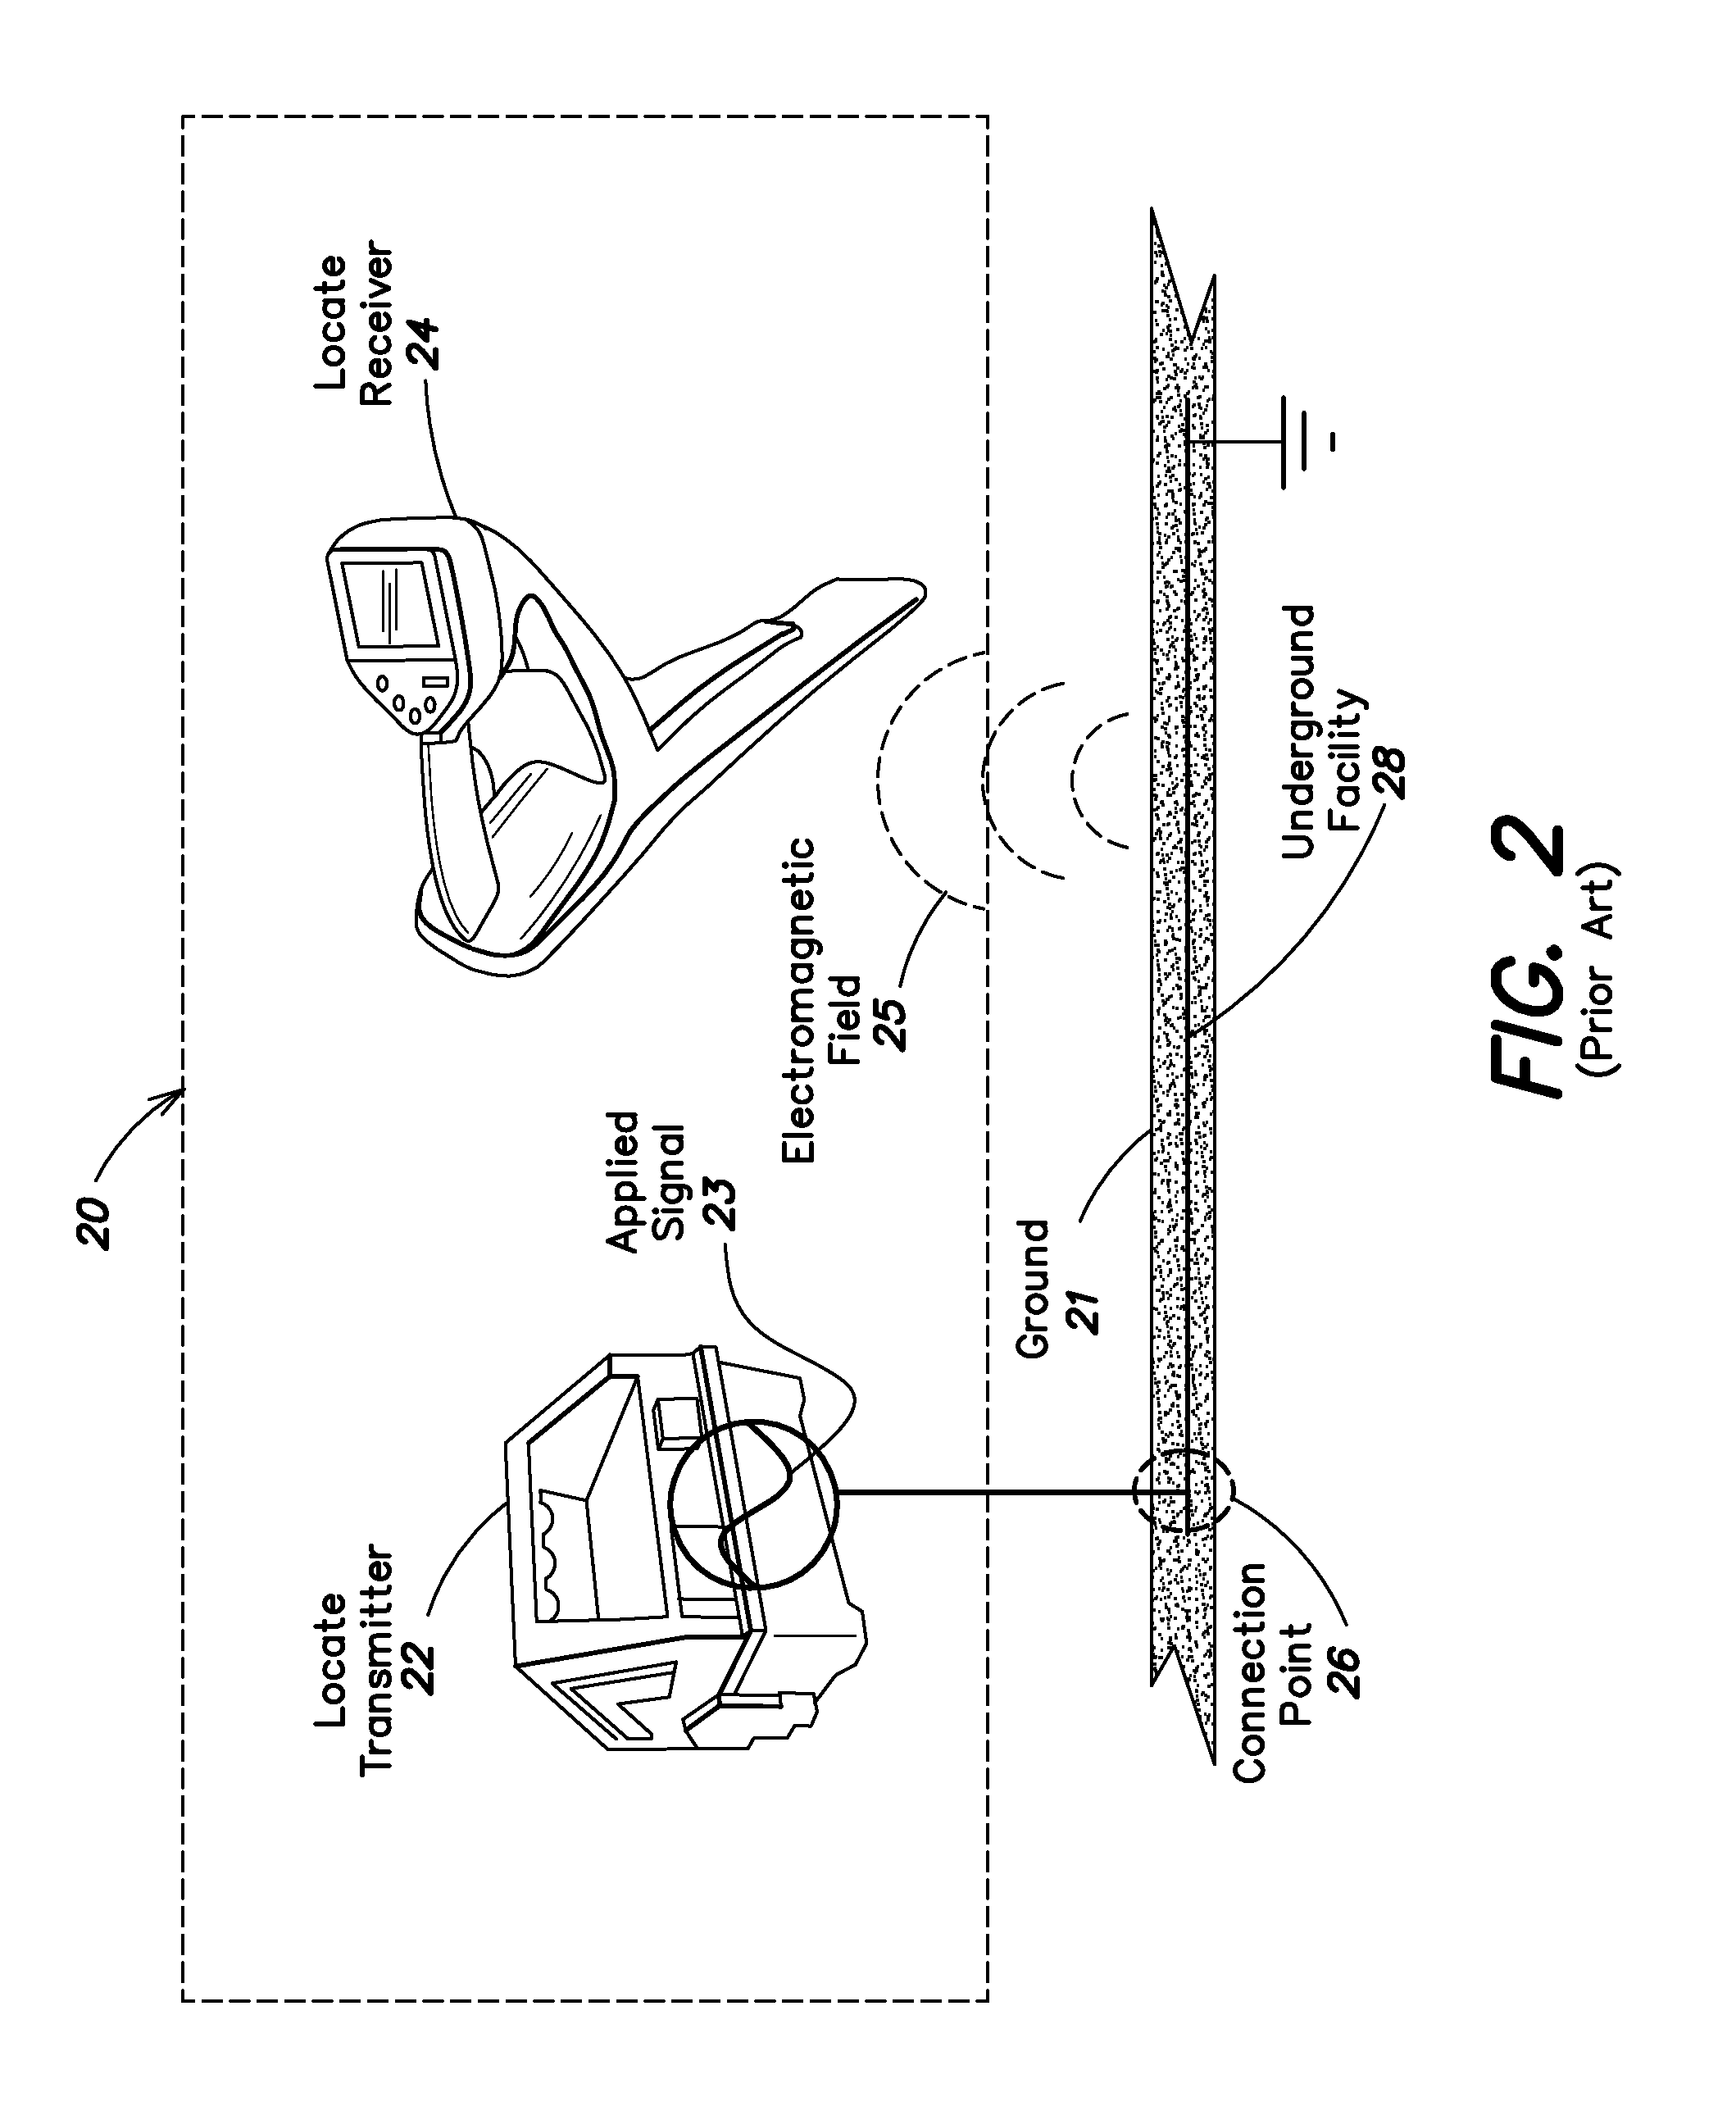 Methods and apparatus for displaying and processing facilities map information and/or other image information on a locate device